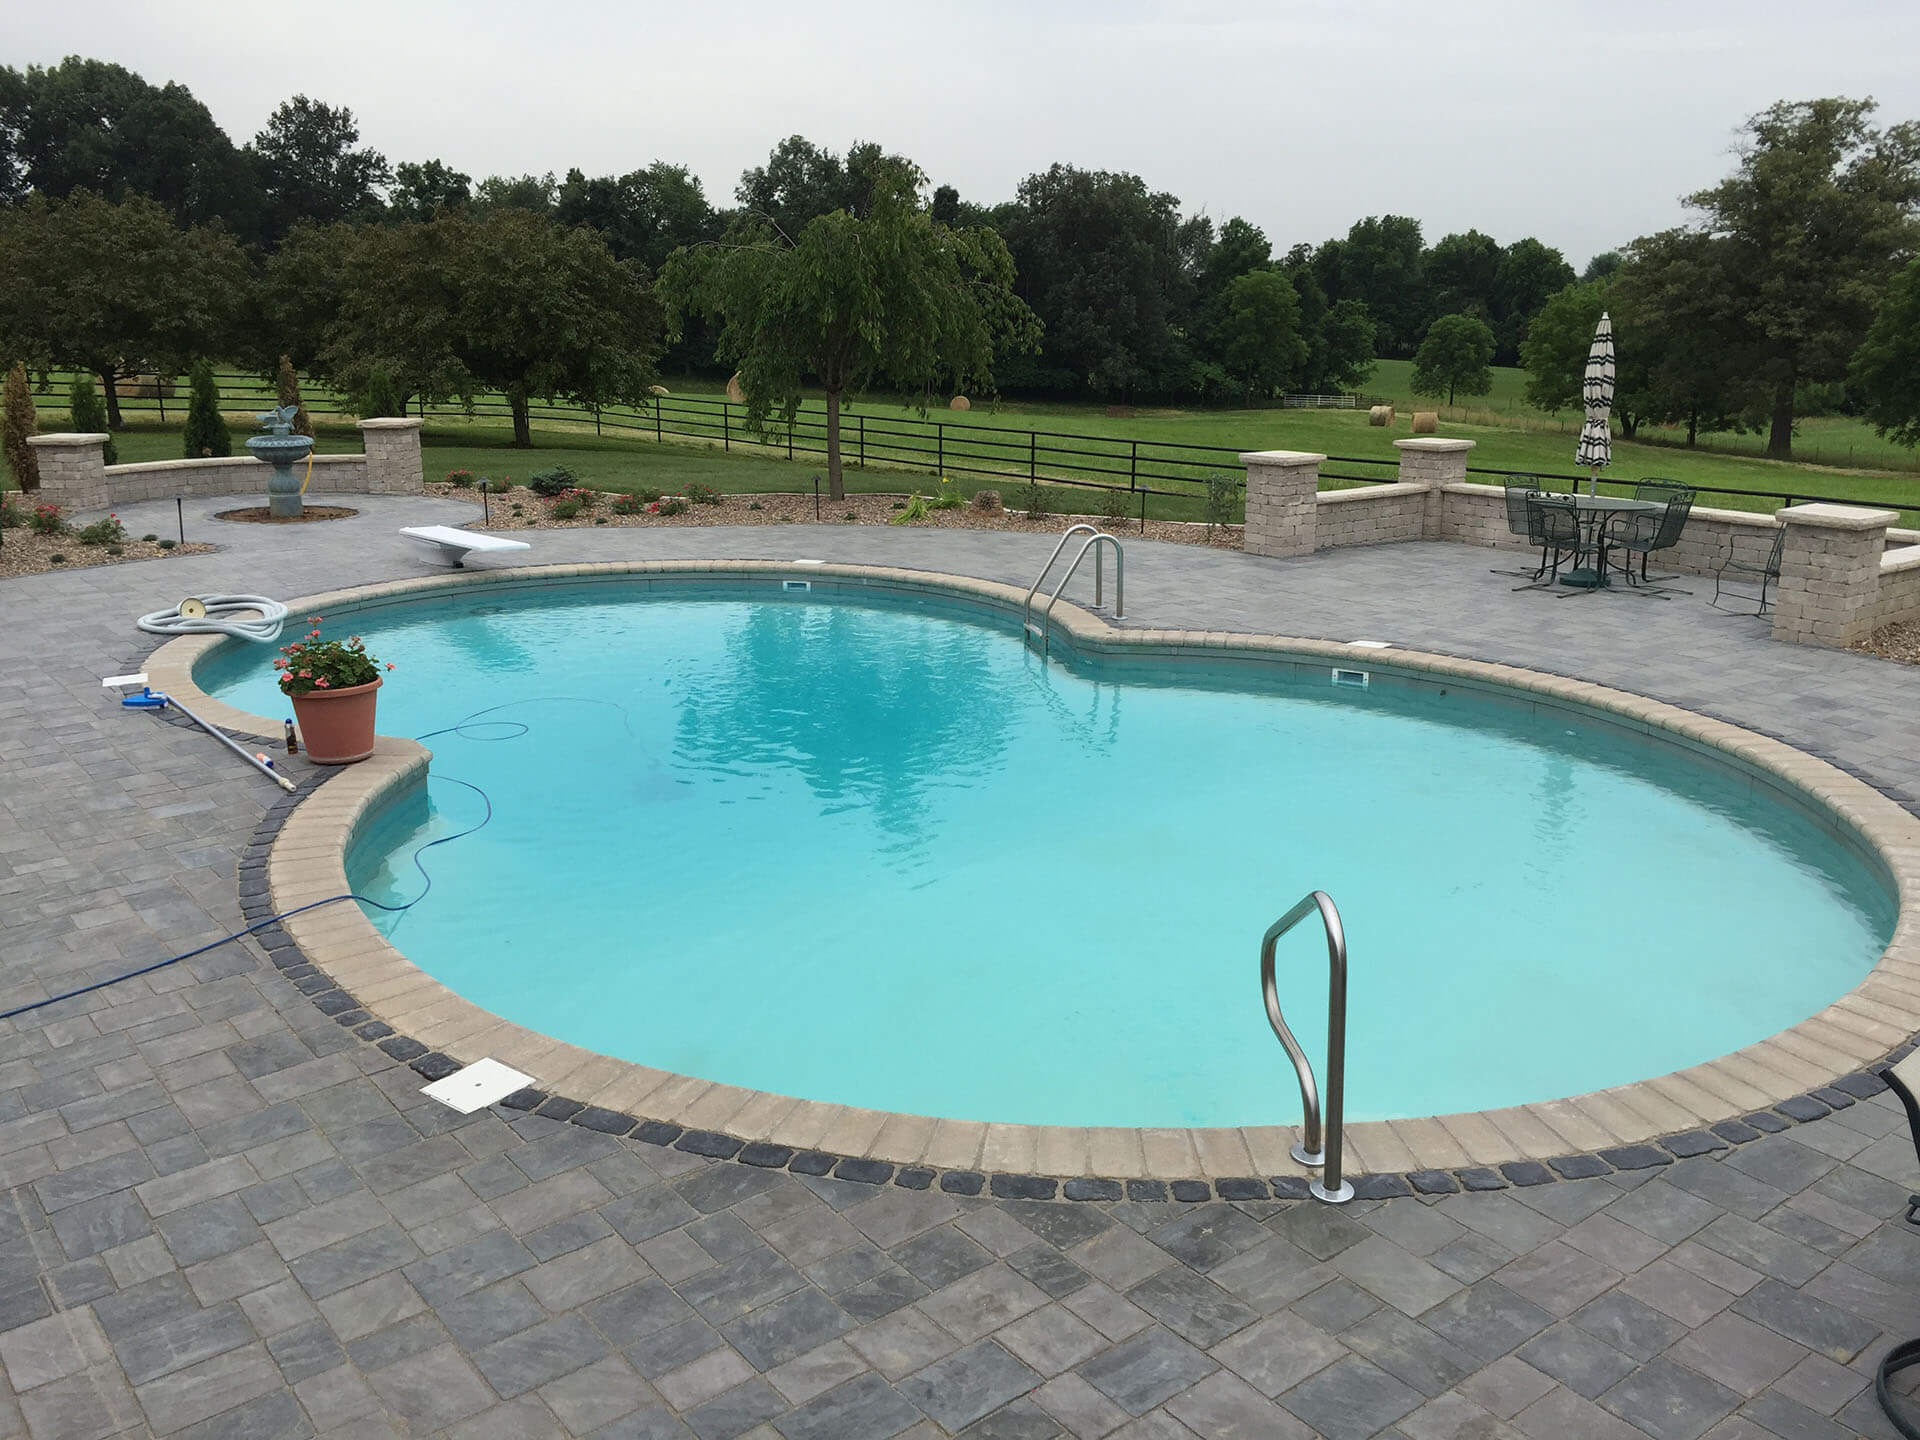 natural stone pool deck for a home in Jackson, MO Project